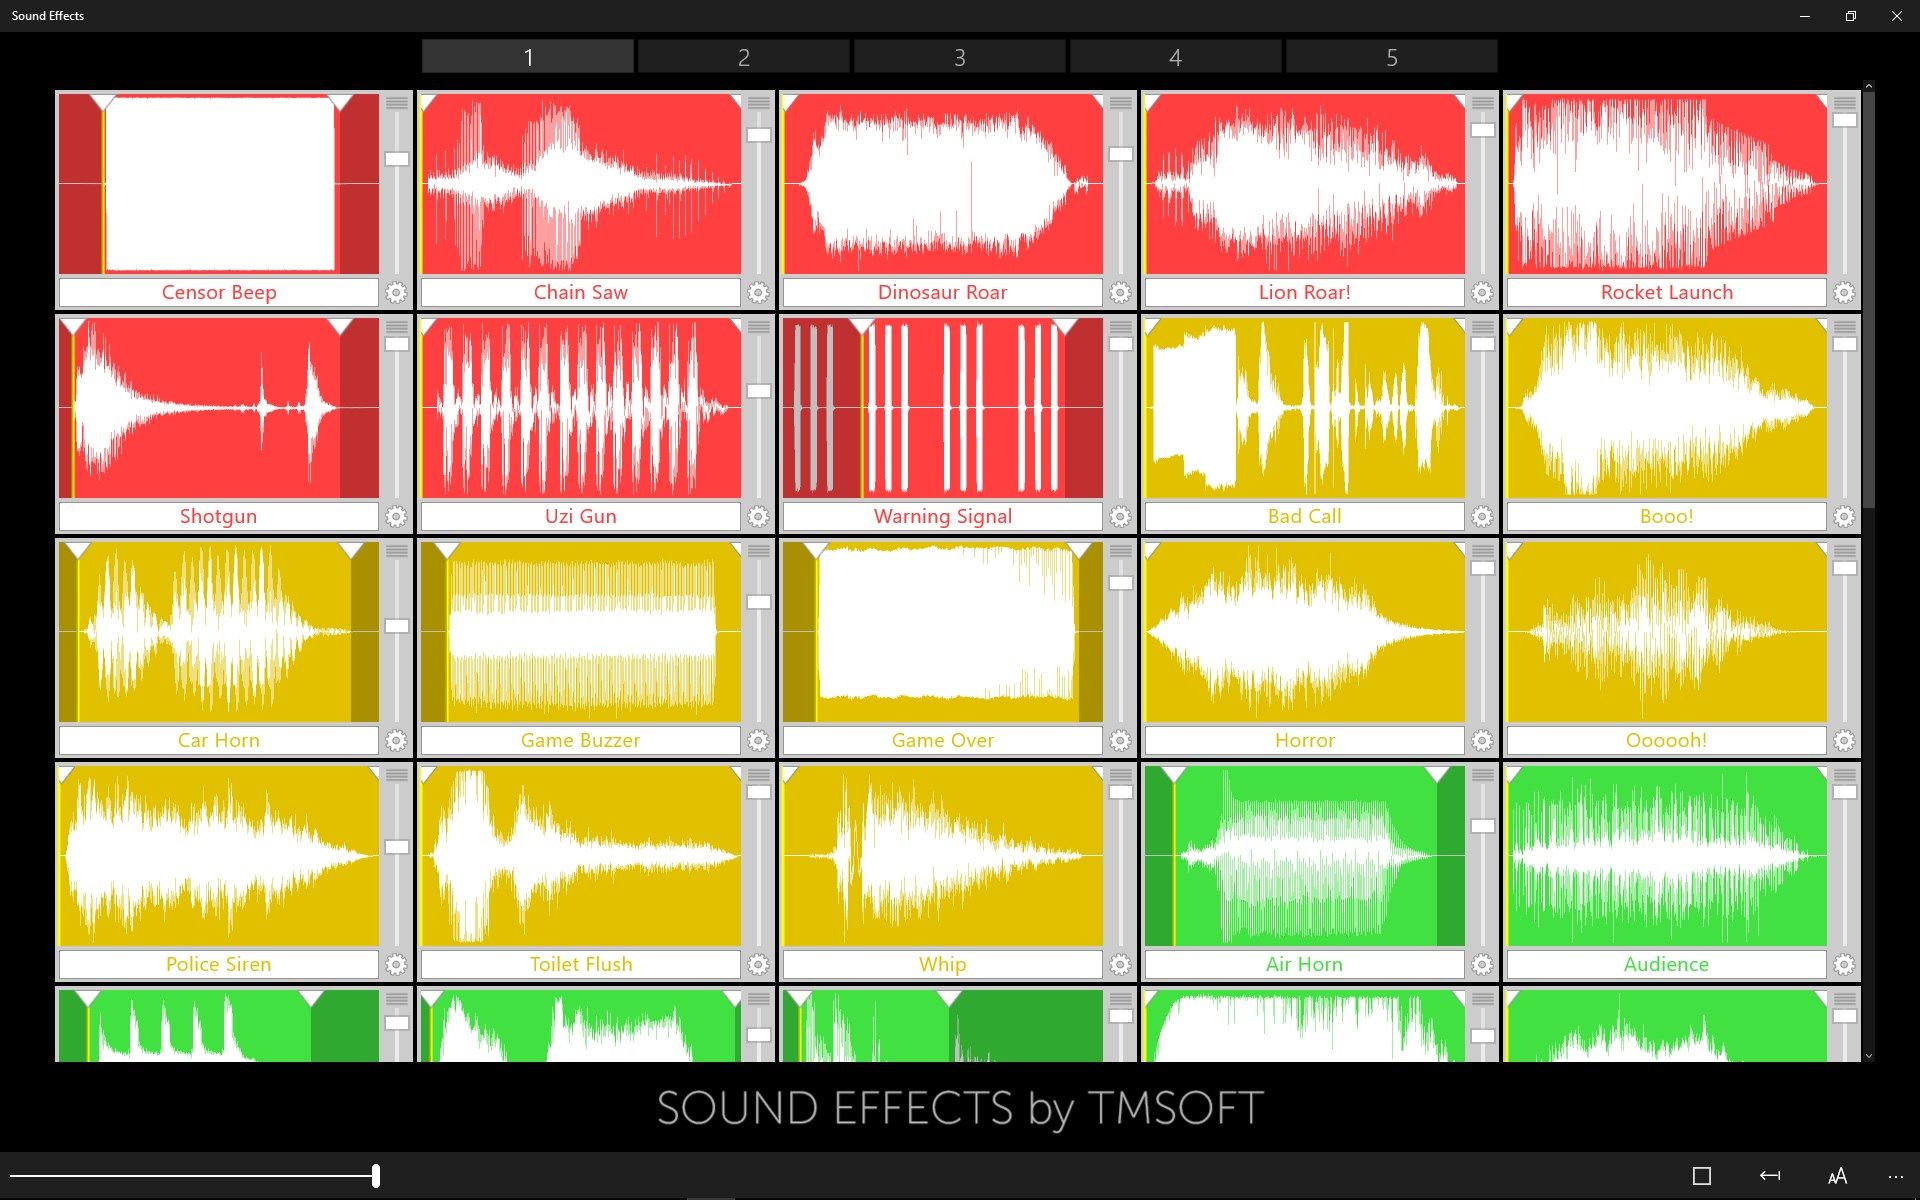 50+ stock sounds with ability to add new sounds!  Perfect for Radio DJs, Podcasters, or just for family fun!